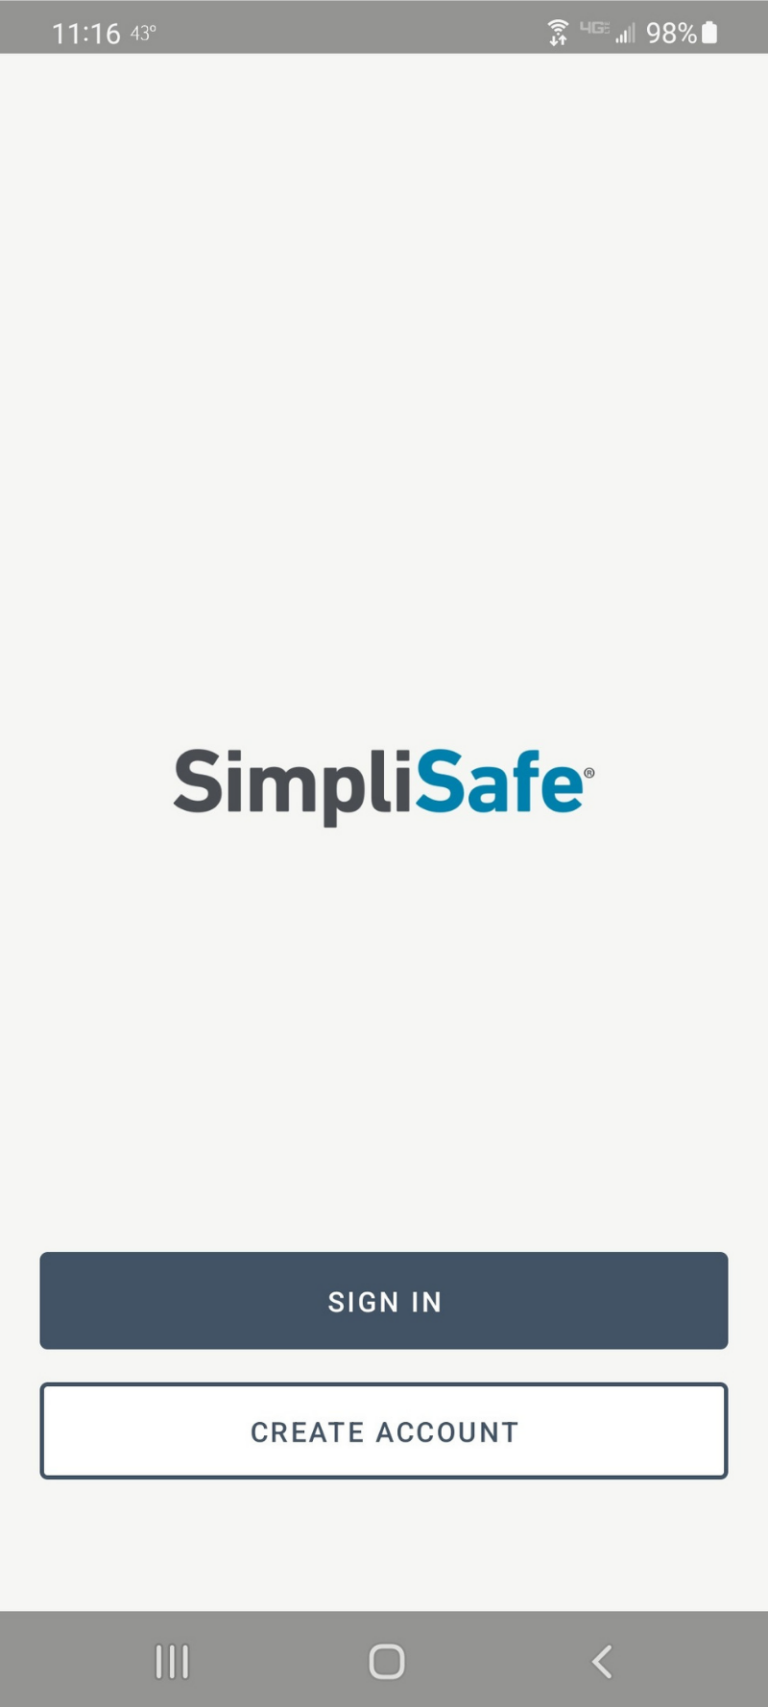 Getting Started with SimpliSafe App